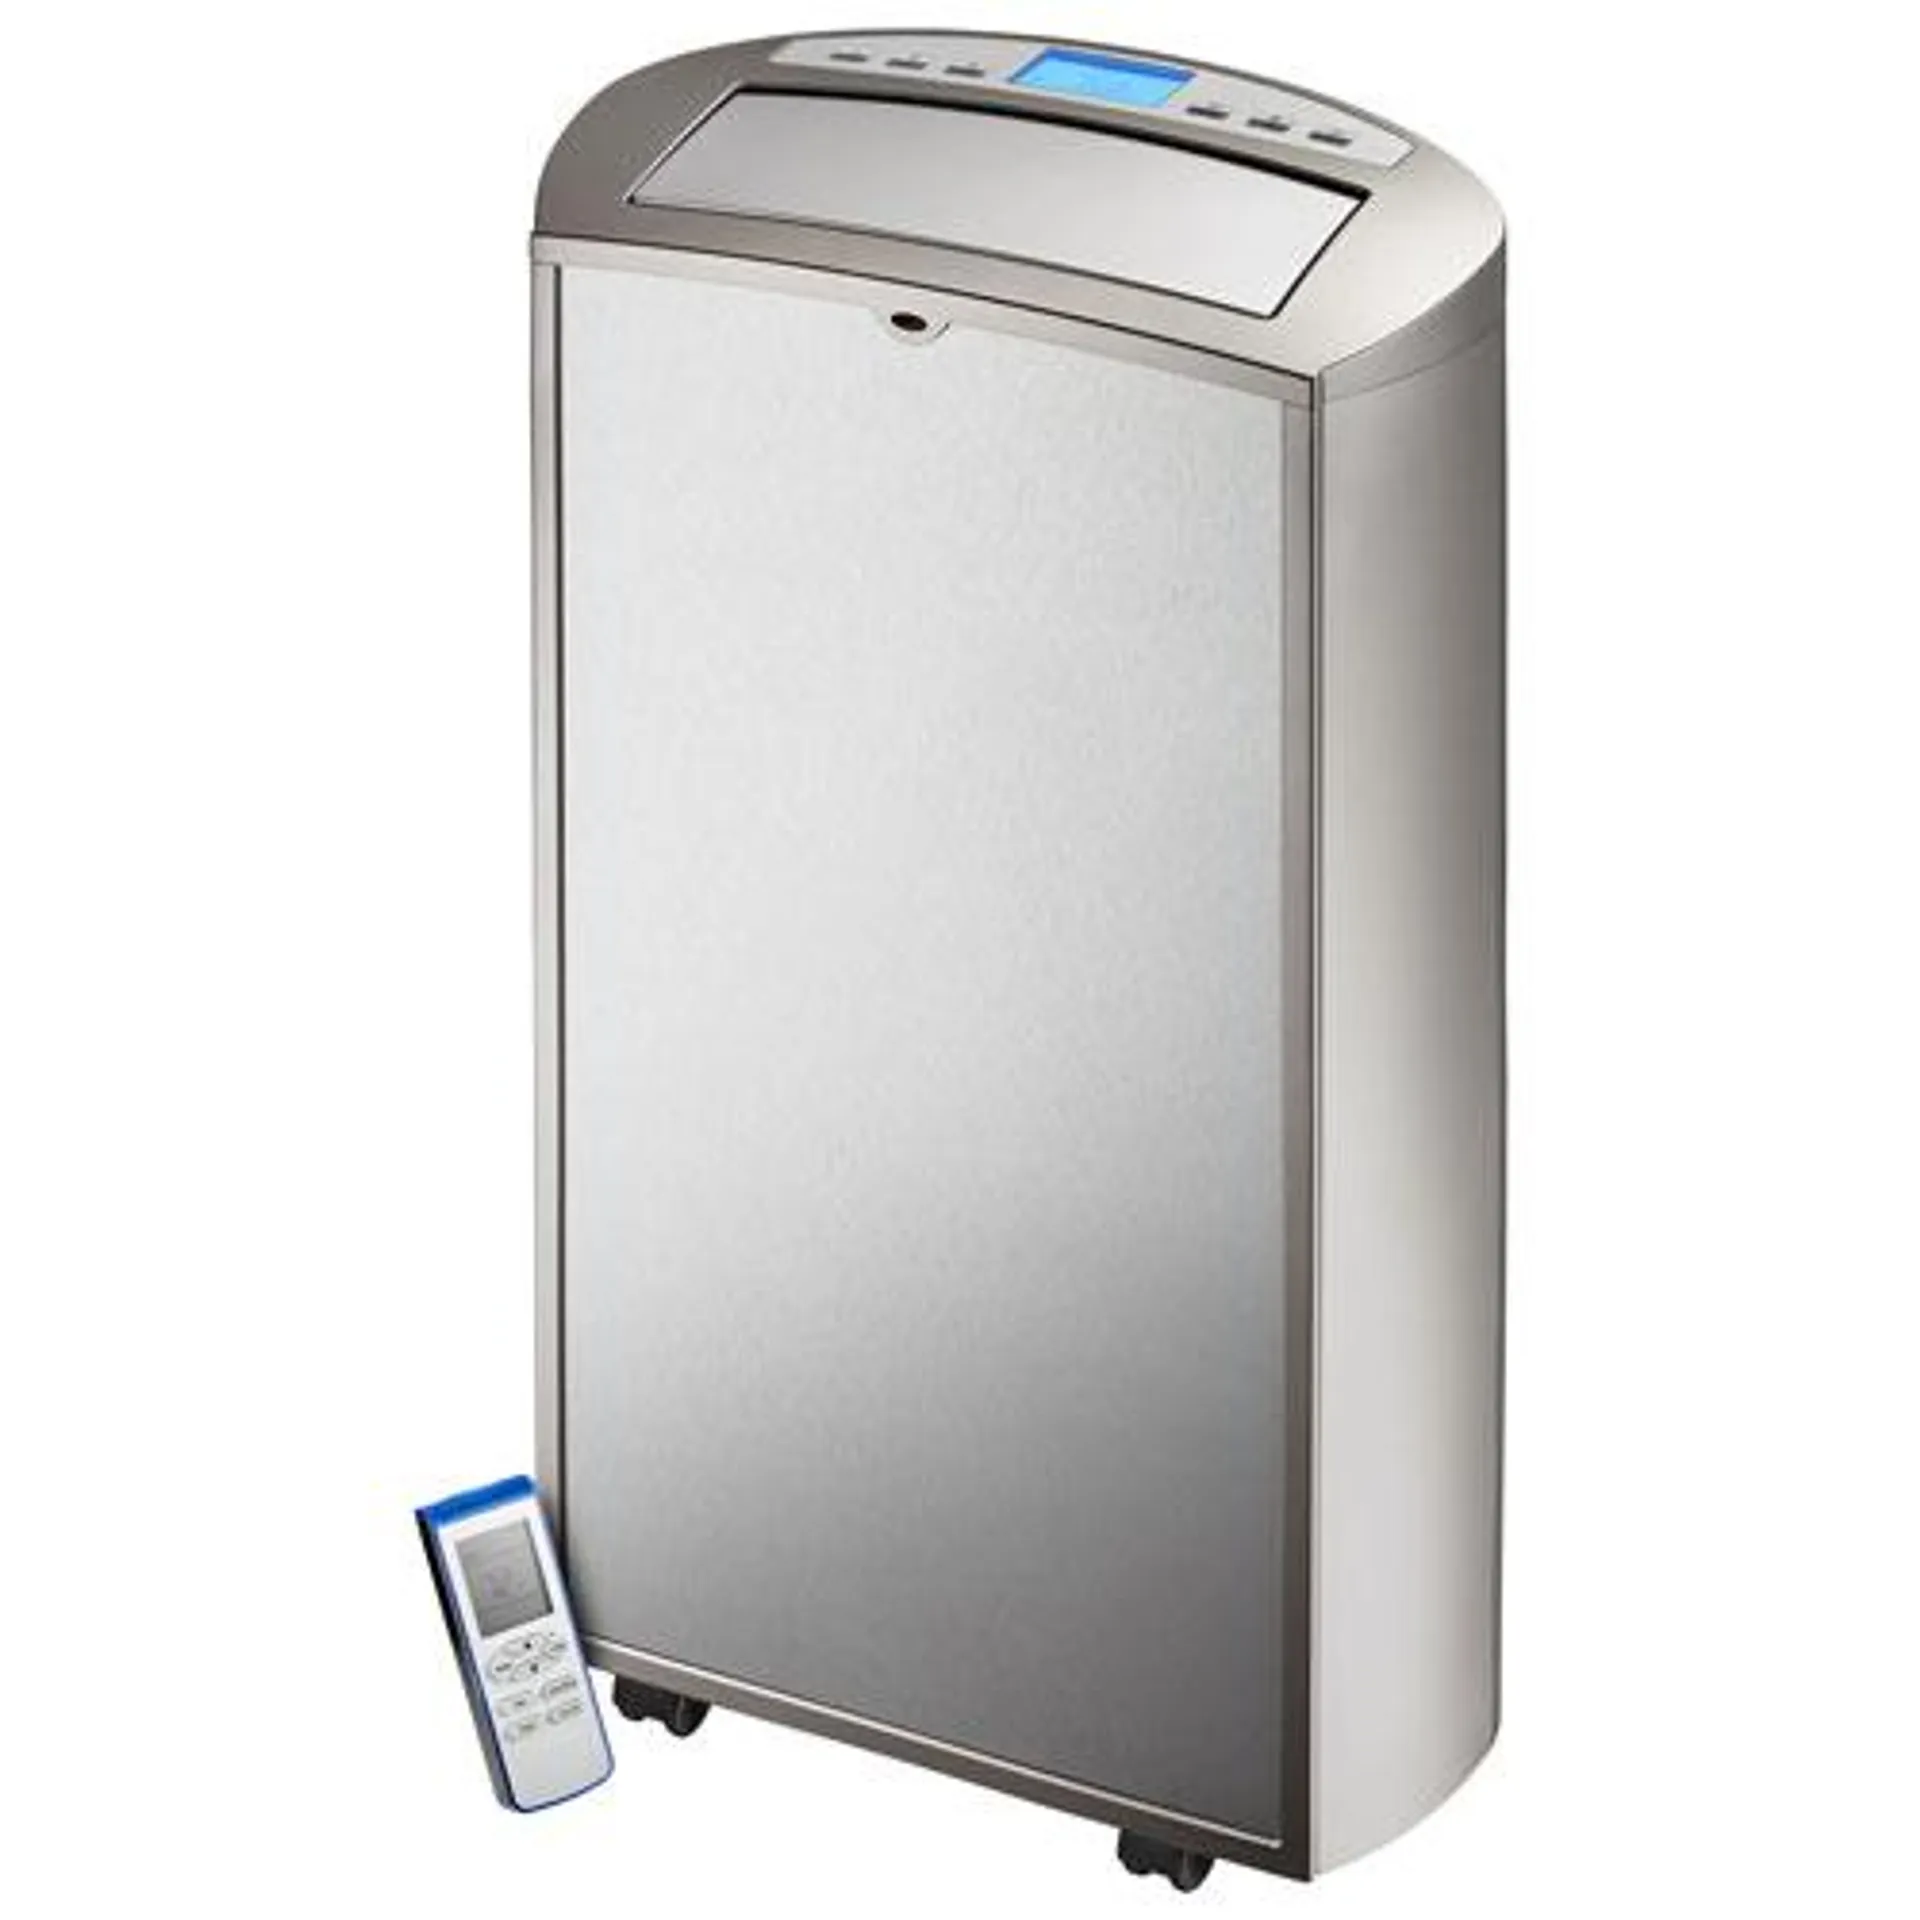 Insignia Portable Air Conditioner - 14000 BTU (SACC 8500 BTU) - Silver/Stainless Steel - Only at Best Buy